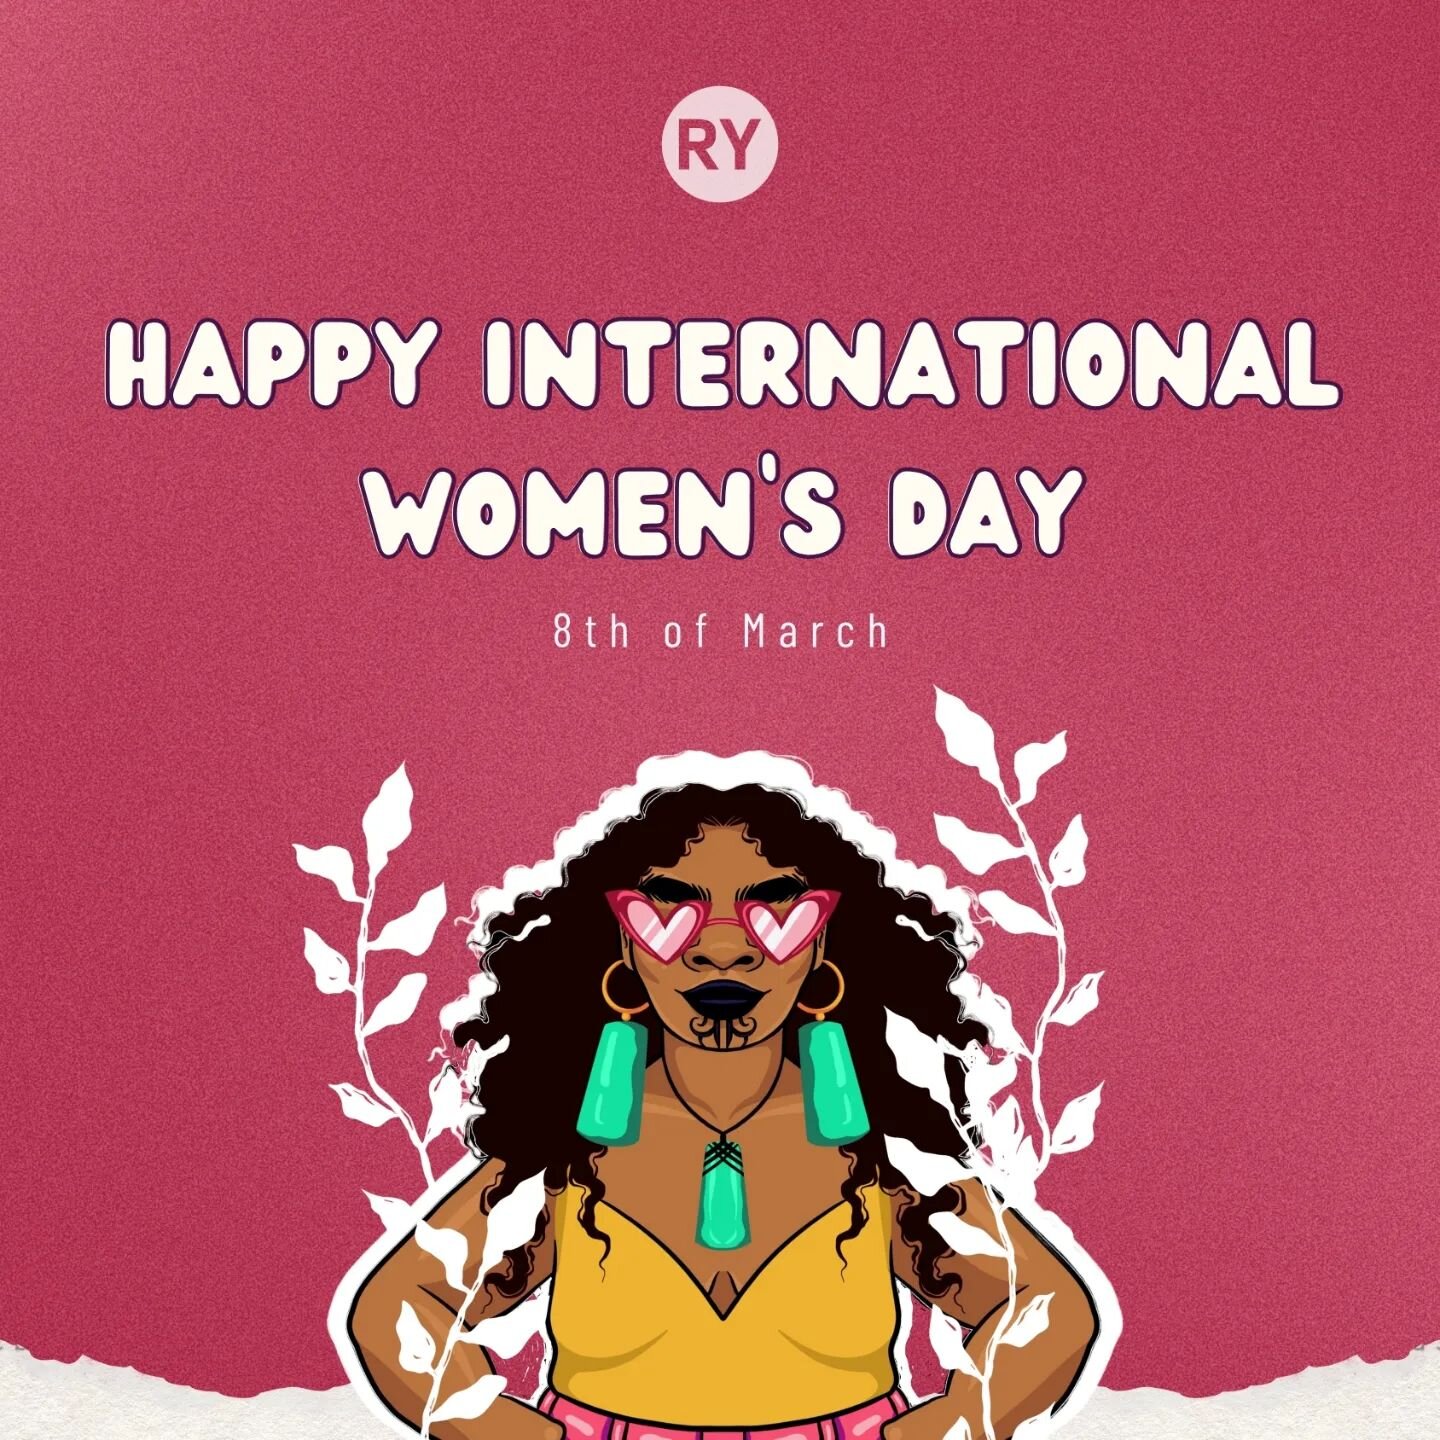 Happy International Women's Day ✨️

Today, we remember the women who are fighting the hardest for their freedom and liberation. 

We come from long legacies of resilience and resistance. Our combined efforts are deeply impactful. We are building a wo